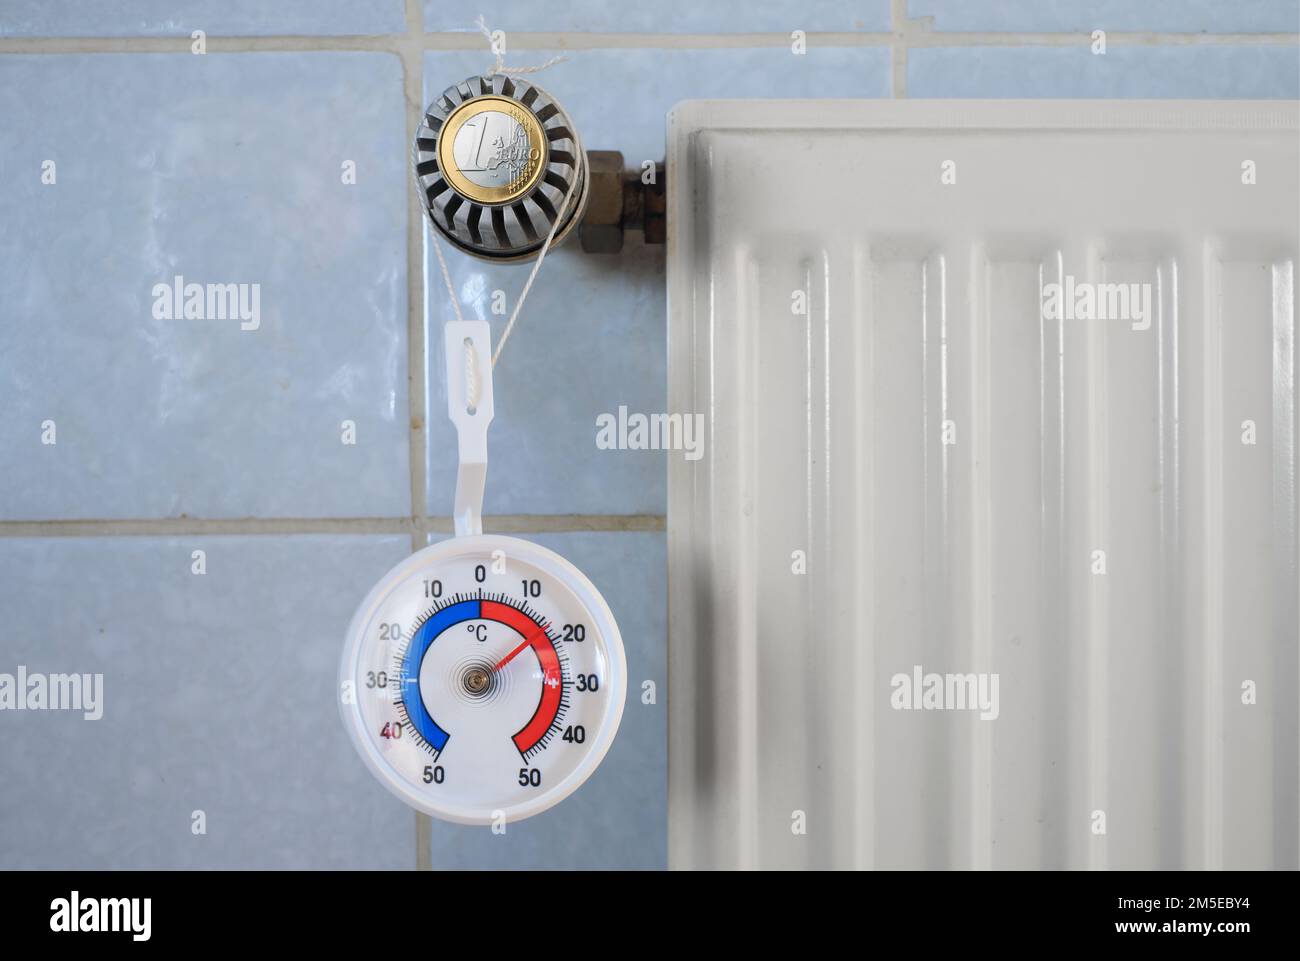 Radiator valve, euro coin and thermometer showing low temperature, rising heating and energy costs due to shortage of heating gas and oil Stock Photo